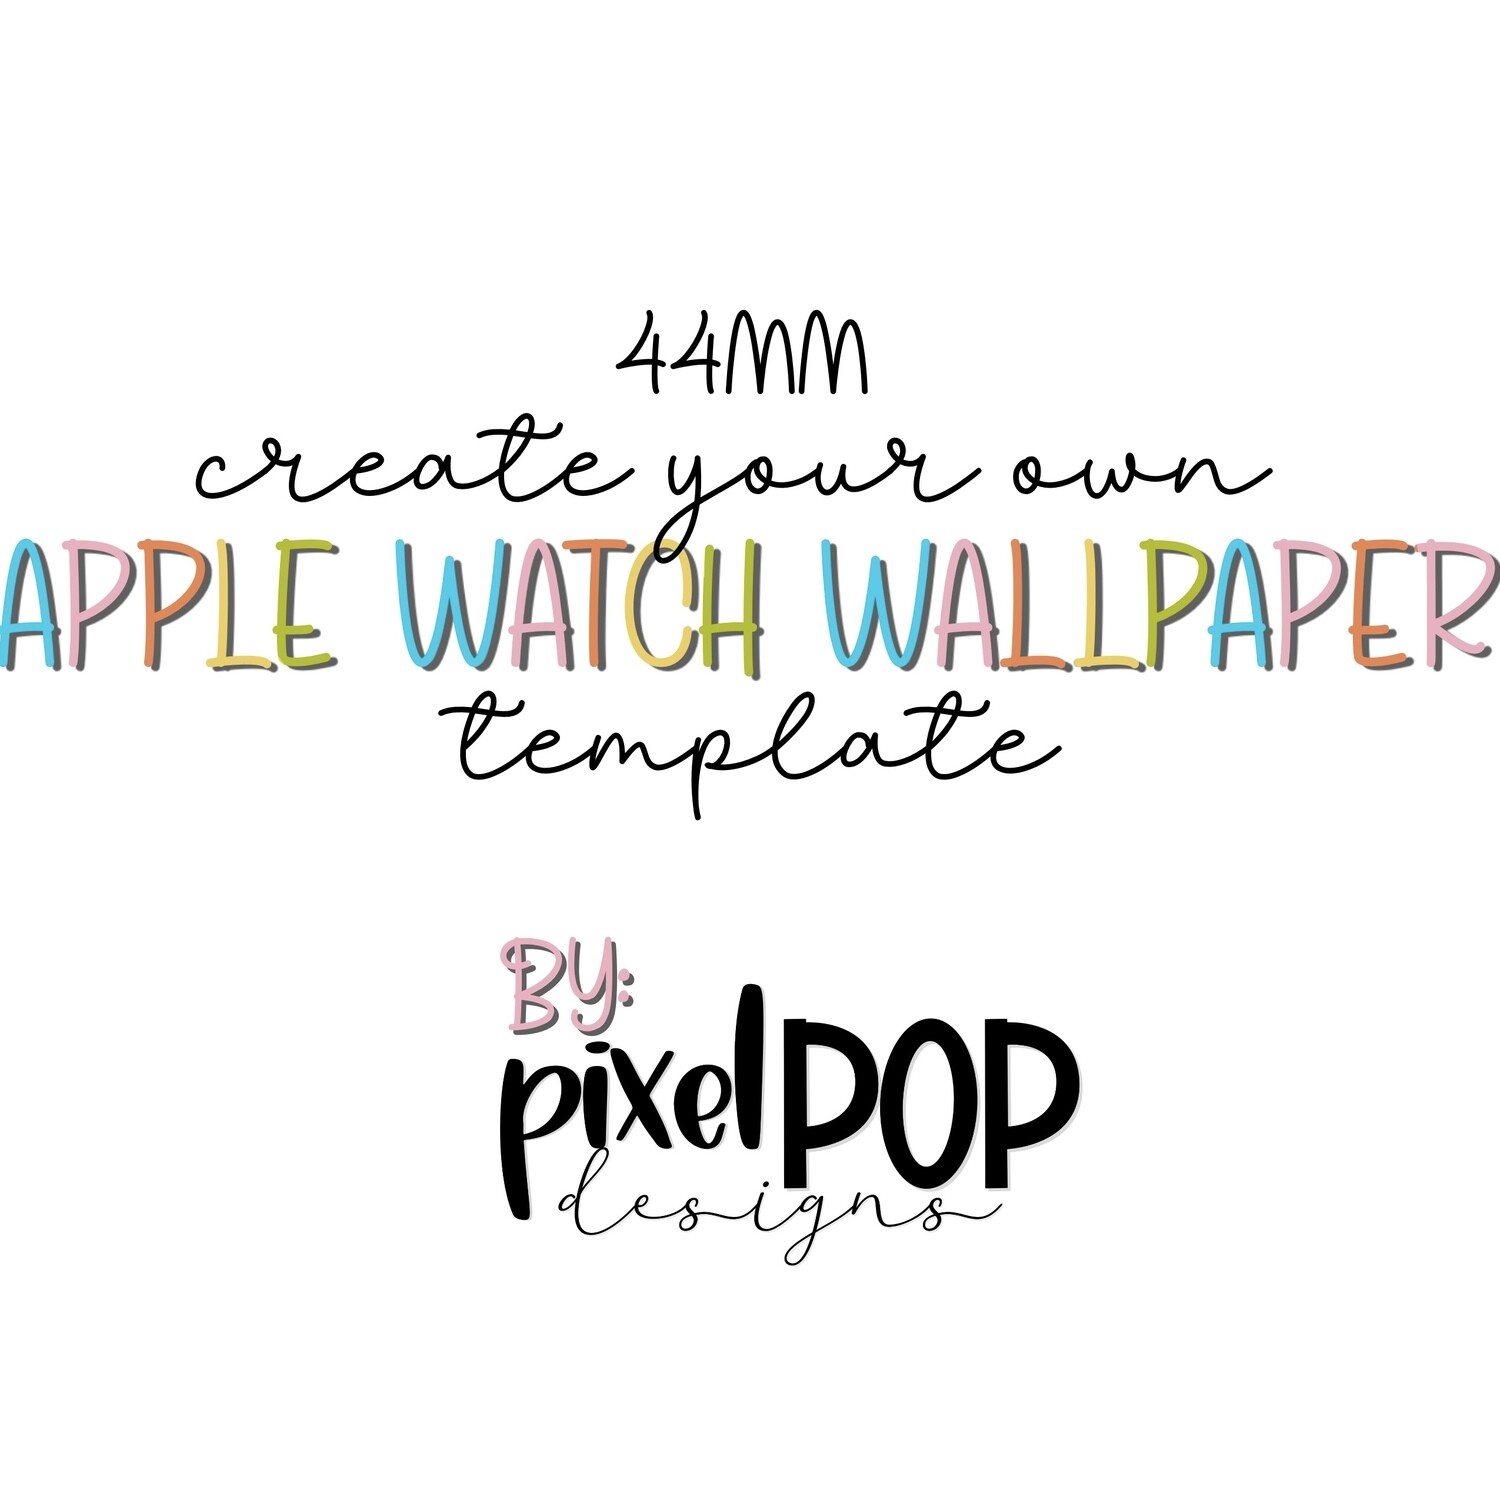 Template - Create Your Own Apple Watch Wallpapers (44mm)